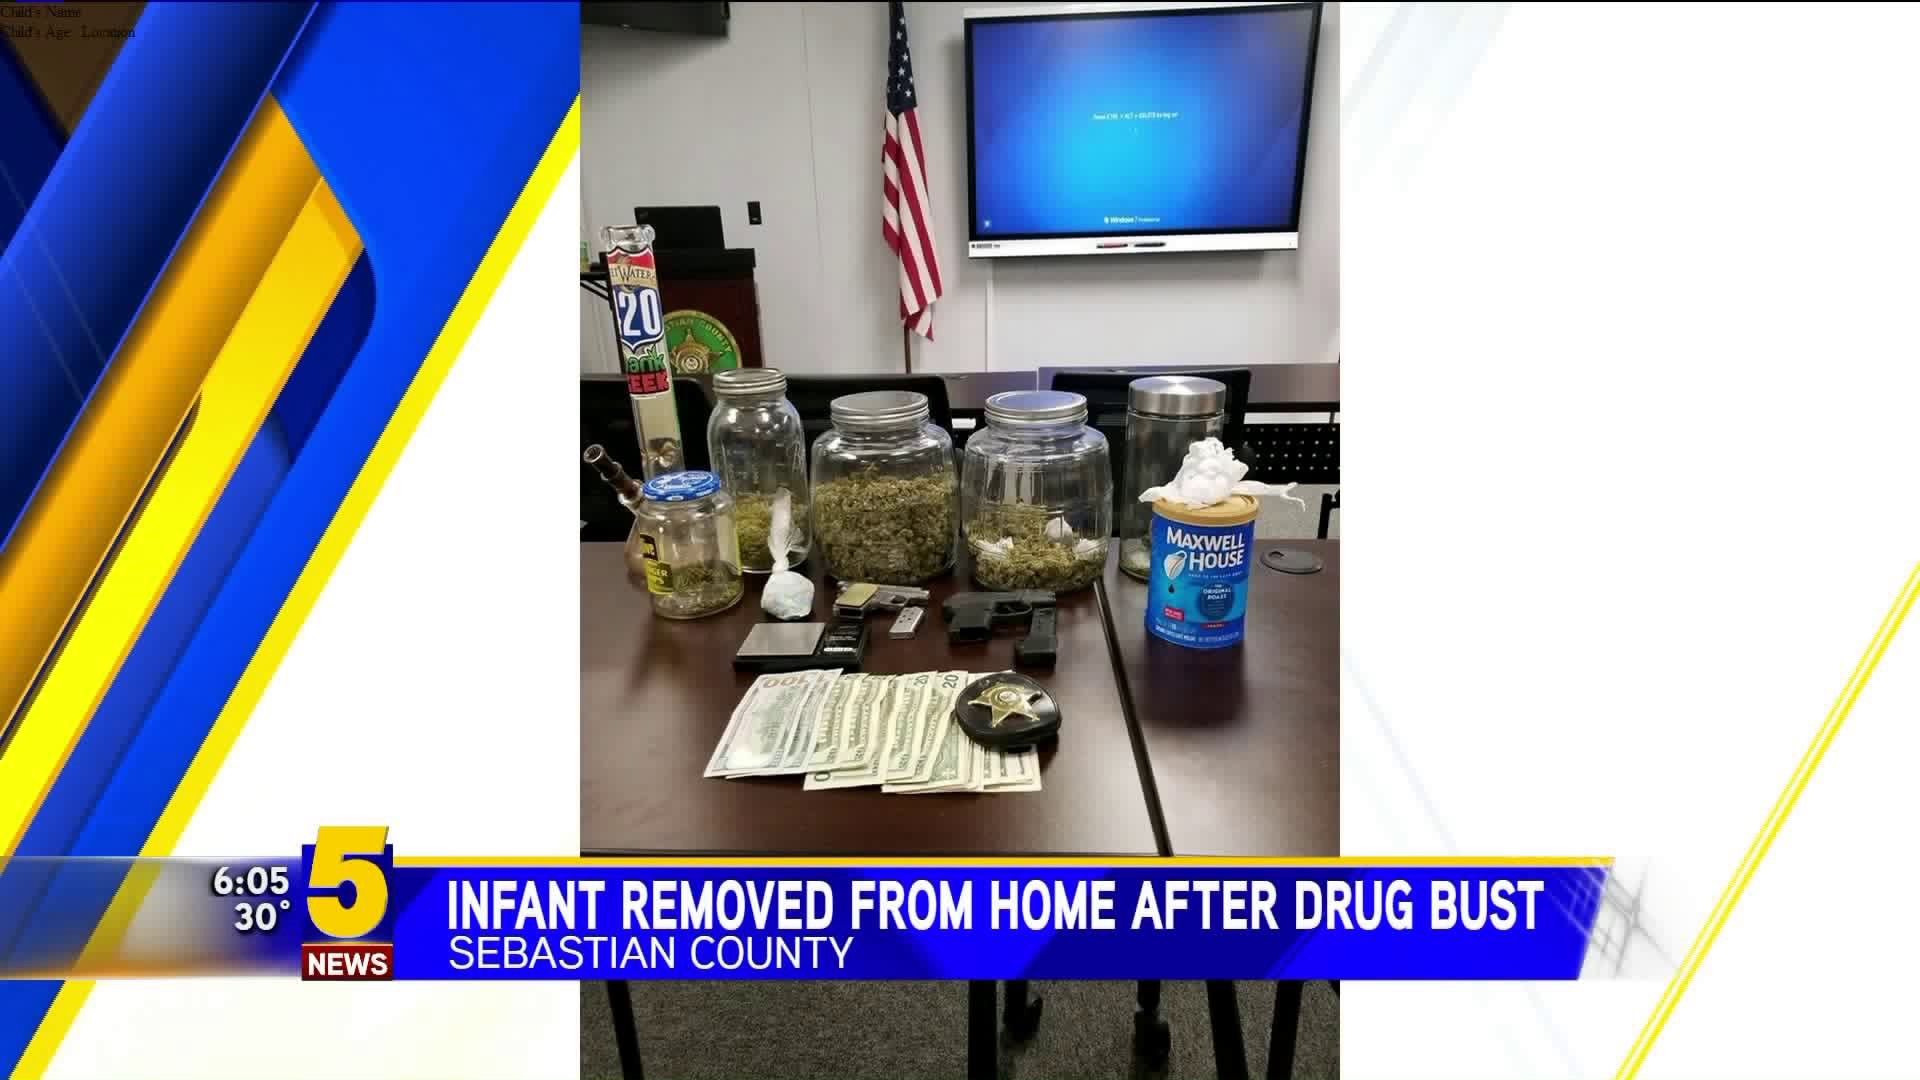 Infant Removed From Home In Sebastian County After Drug Bust